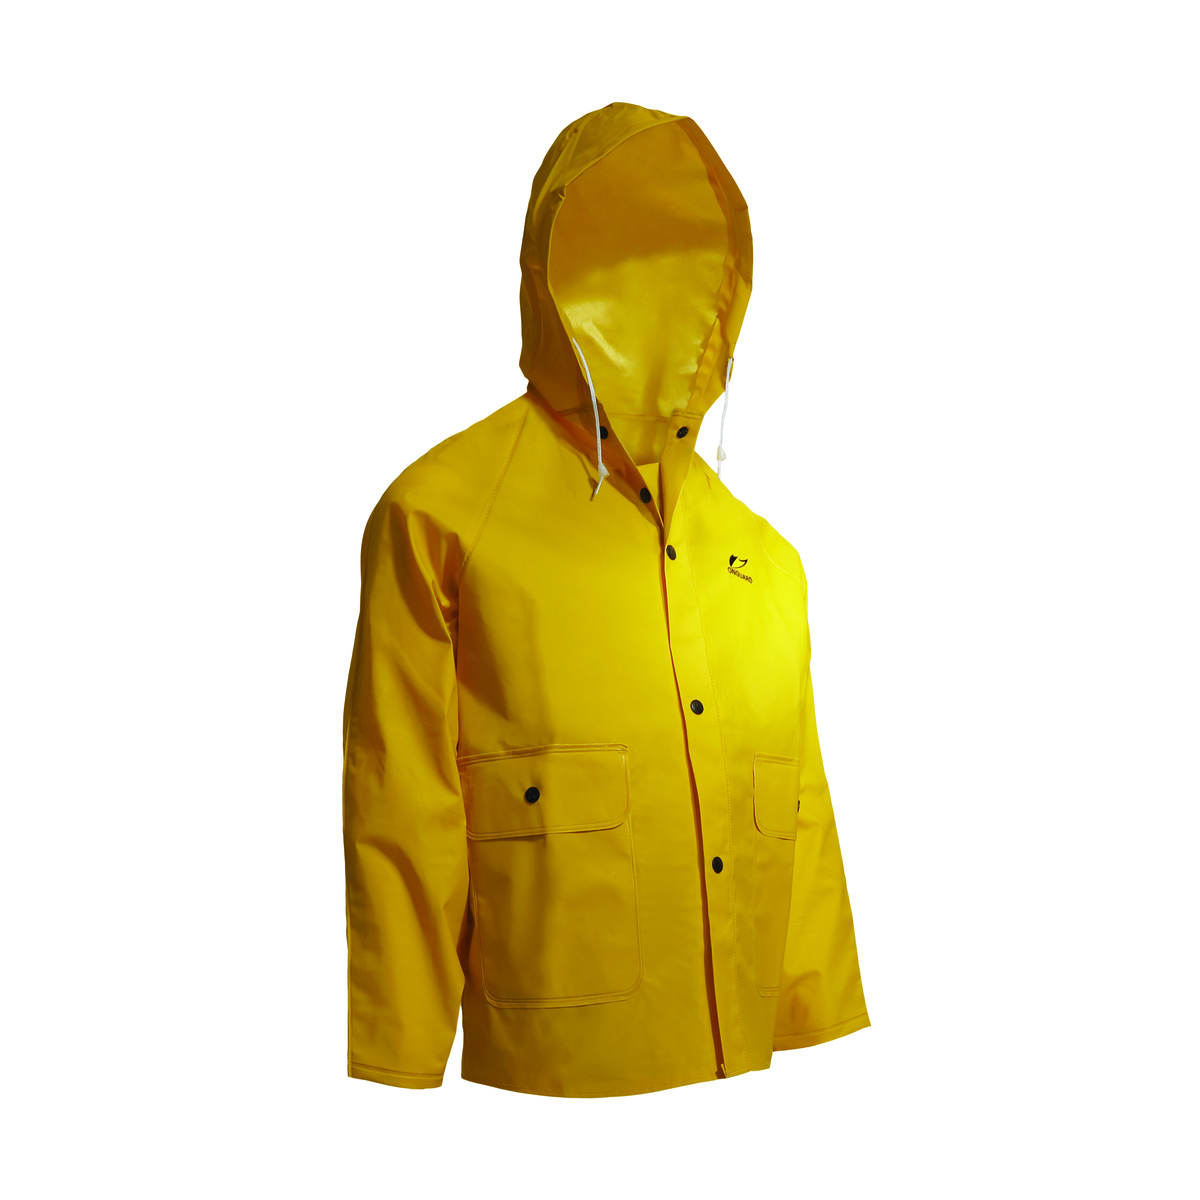 Dunlop® Protective Footwear Medium Yellow Sitex .35 mm Polyester/PVC Rain Jacket With Attached Hood